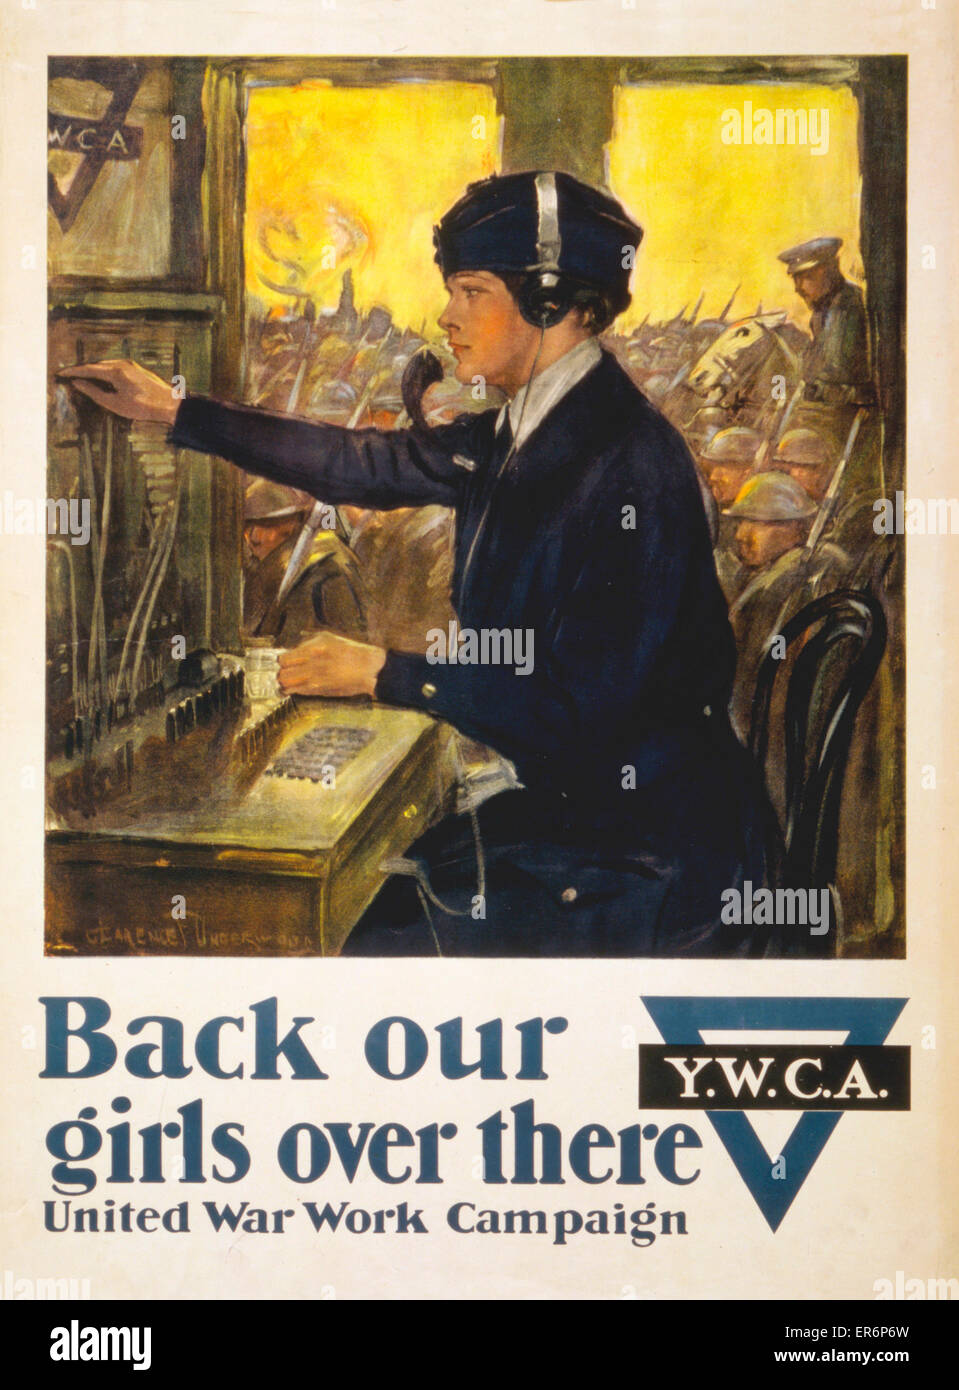 Back our girls over there United War Work Campaign . YWCA poster for the United War Work Campaign showing a young woman seated at a switchboard with soldiers in the background. Date 1918. Stock Photo